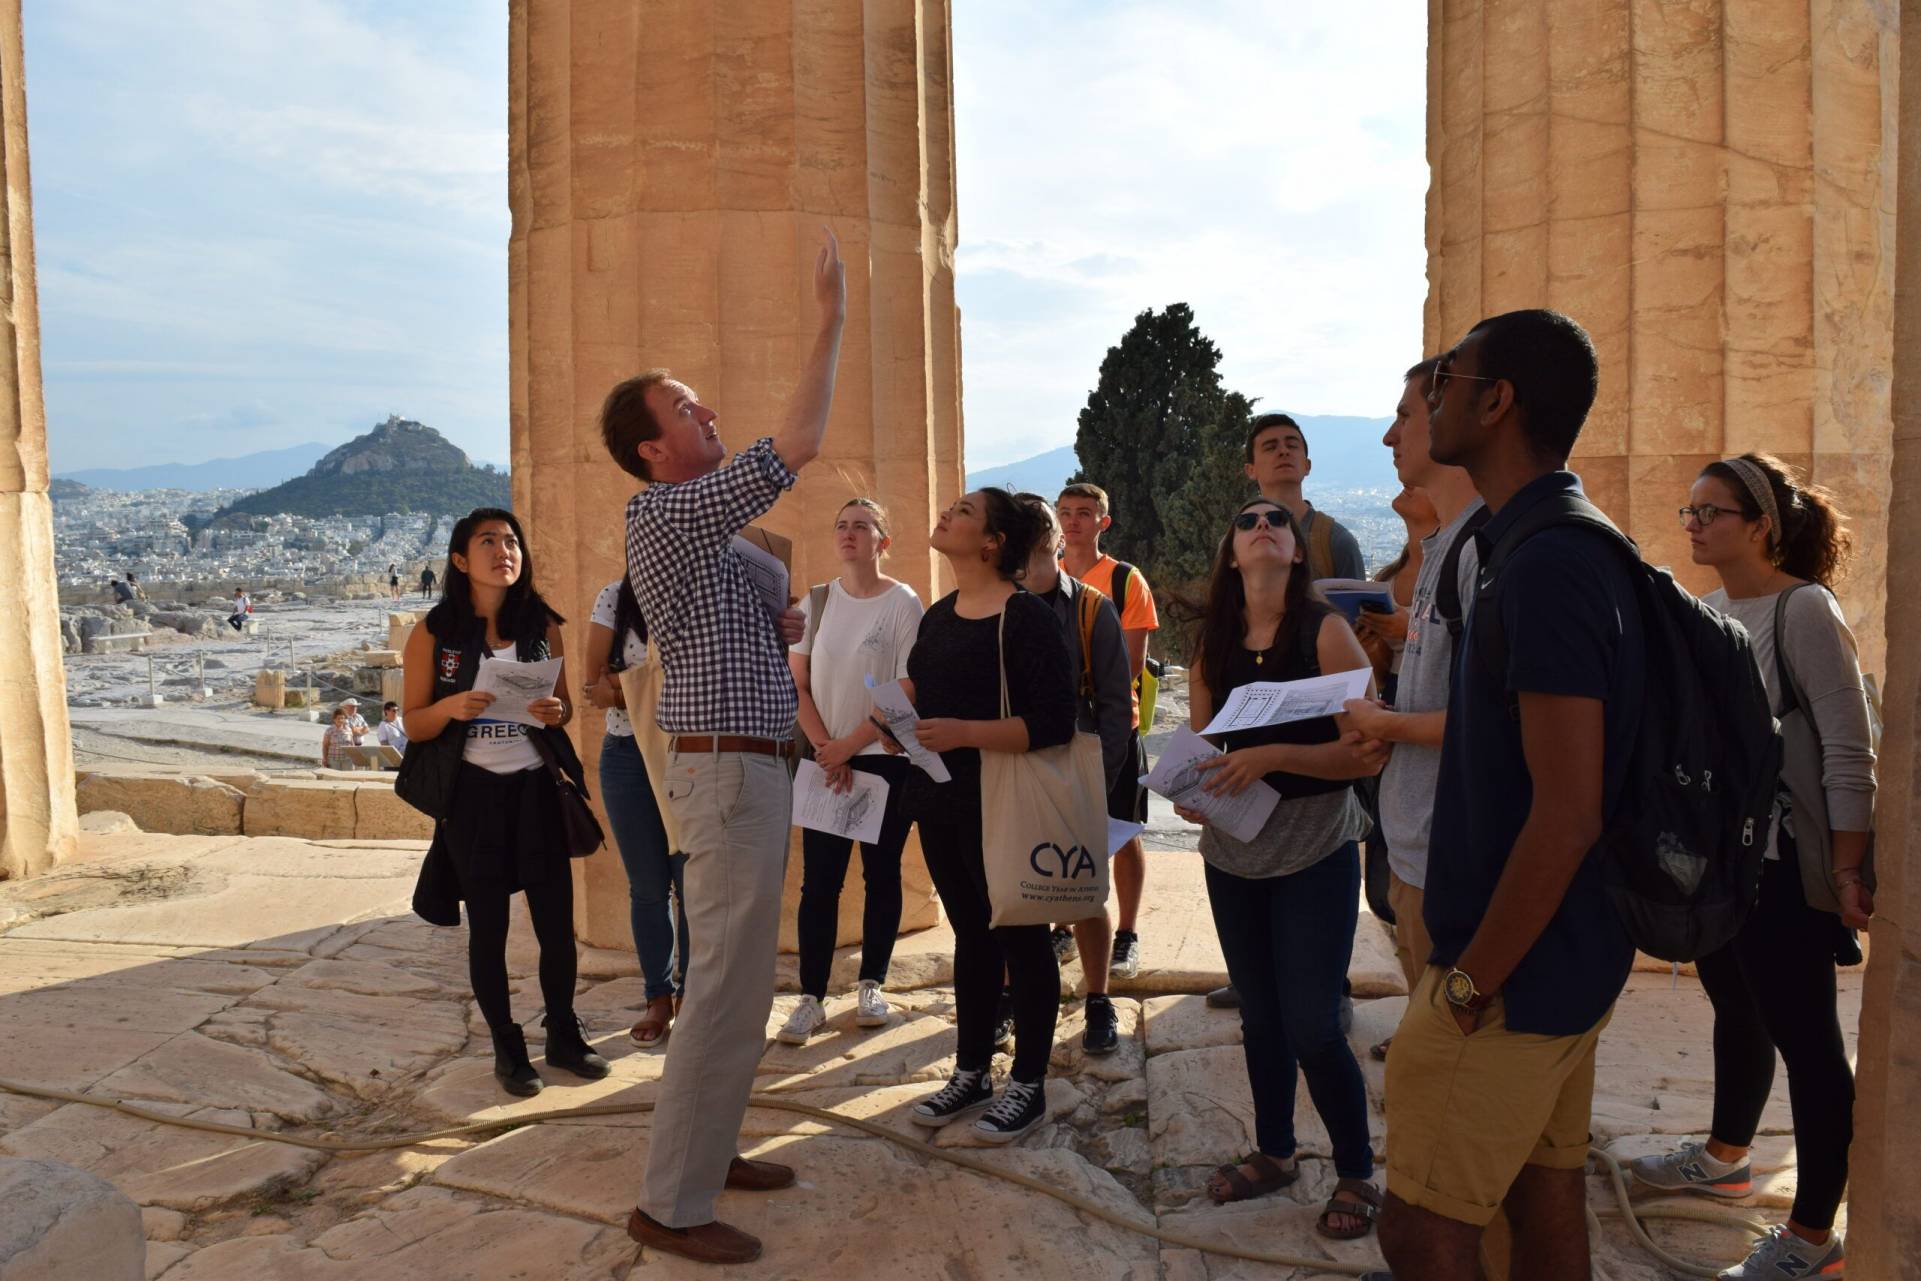 CYA - College Year in Athens 2. Students of the Topography of Athens class get the rare opportunity to visit the inside of the Parthenon which is closed for the public scaled